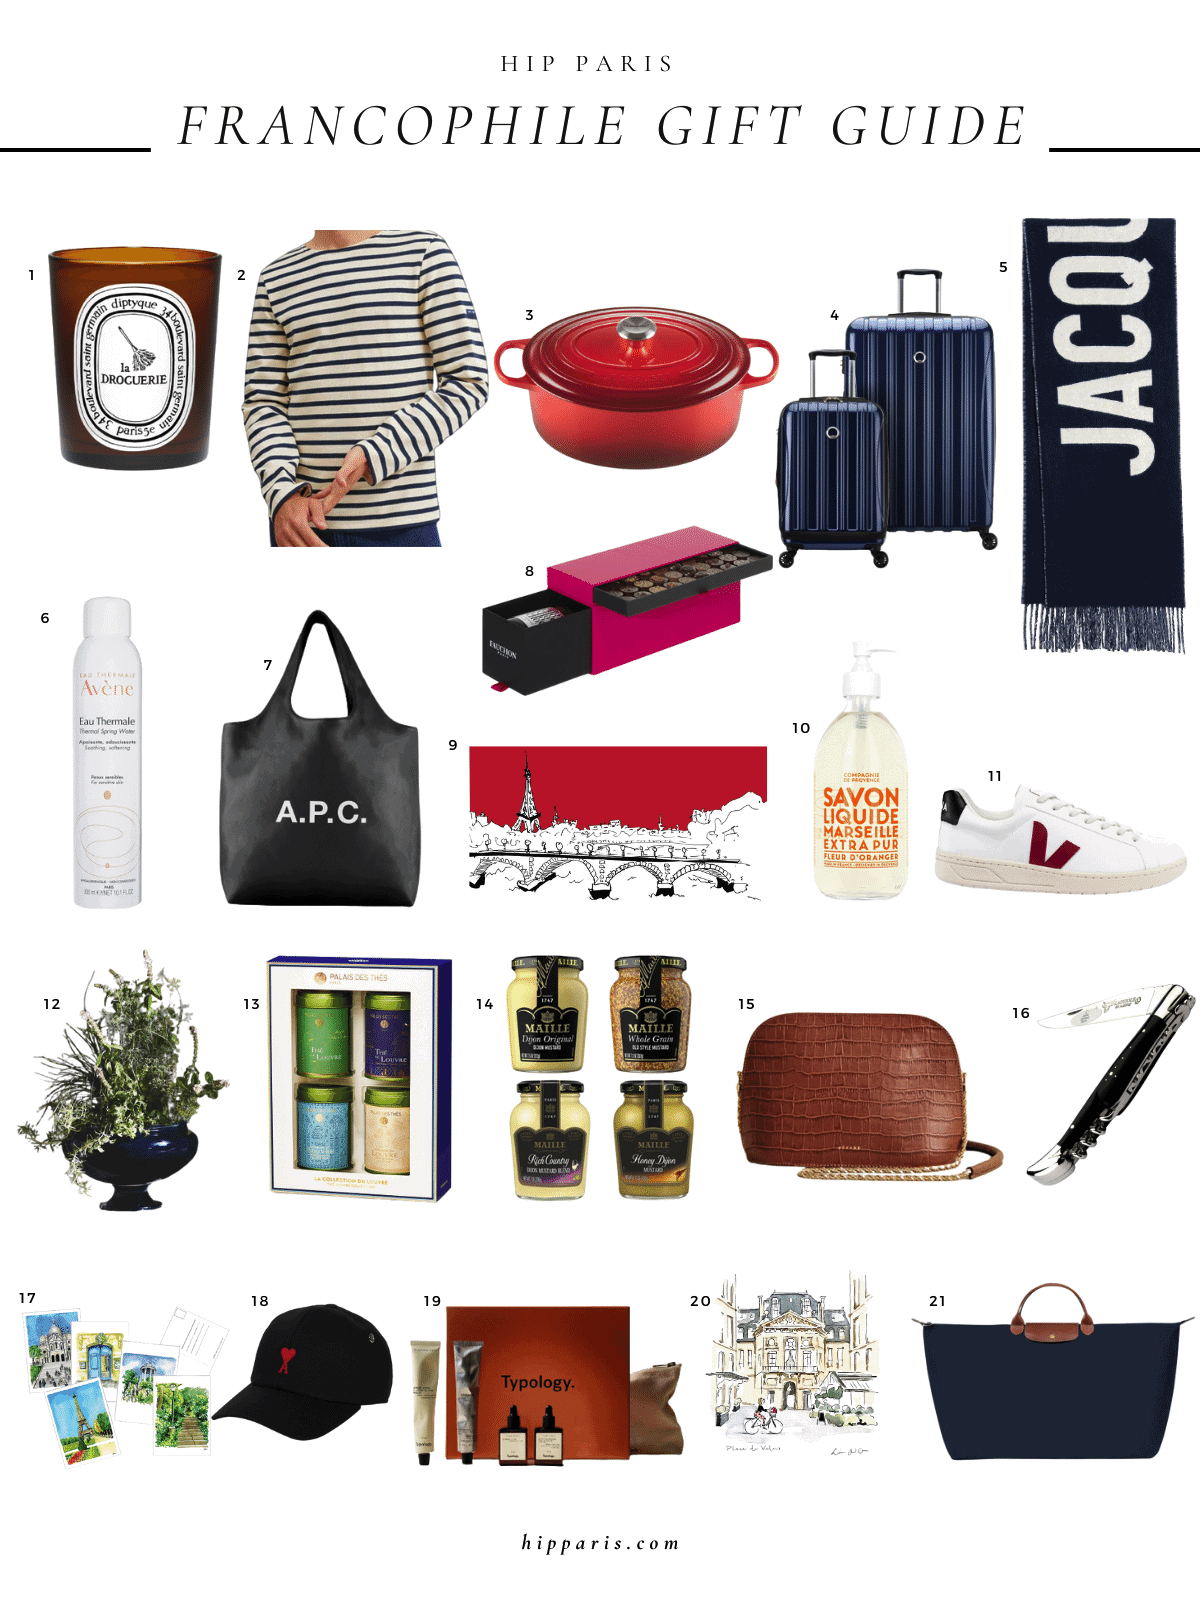 A collage of french inspired gender neutral gifts recommended by HIP Paris.